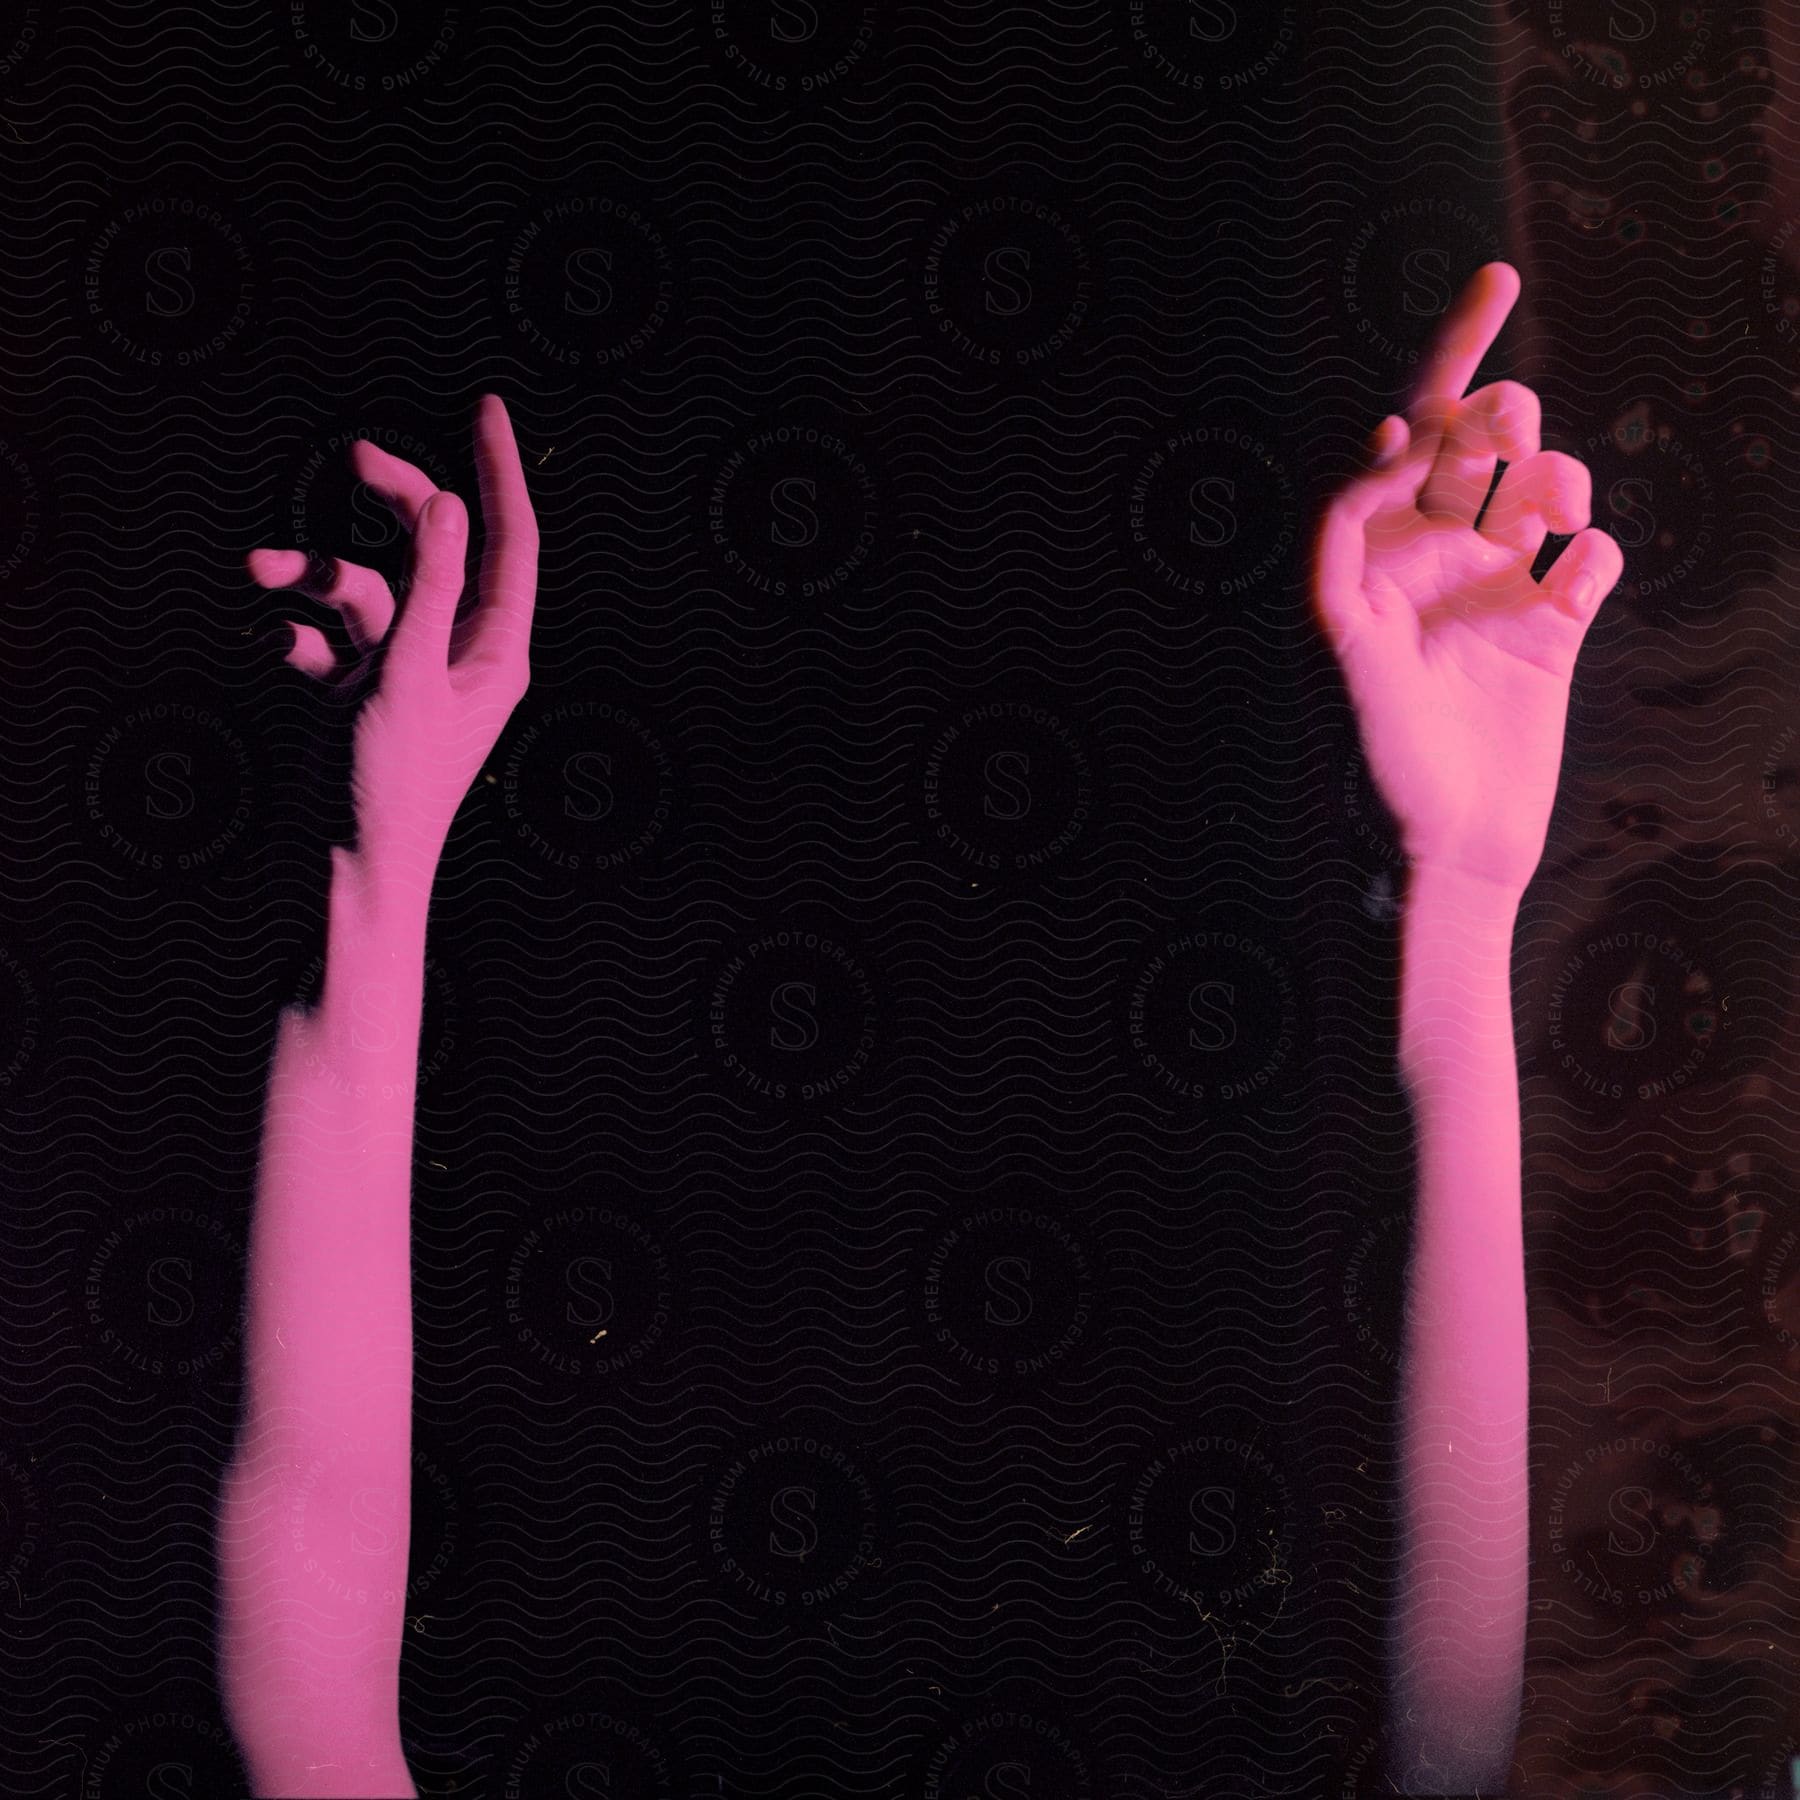 A womans hand with a purple nail and a thumb raised in a gesture